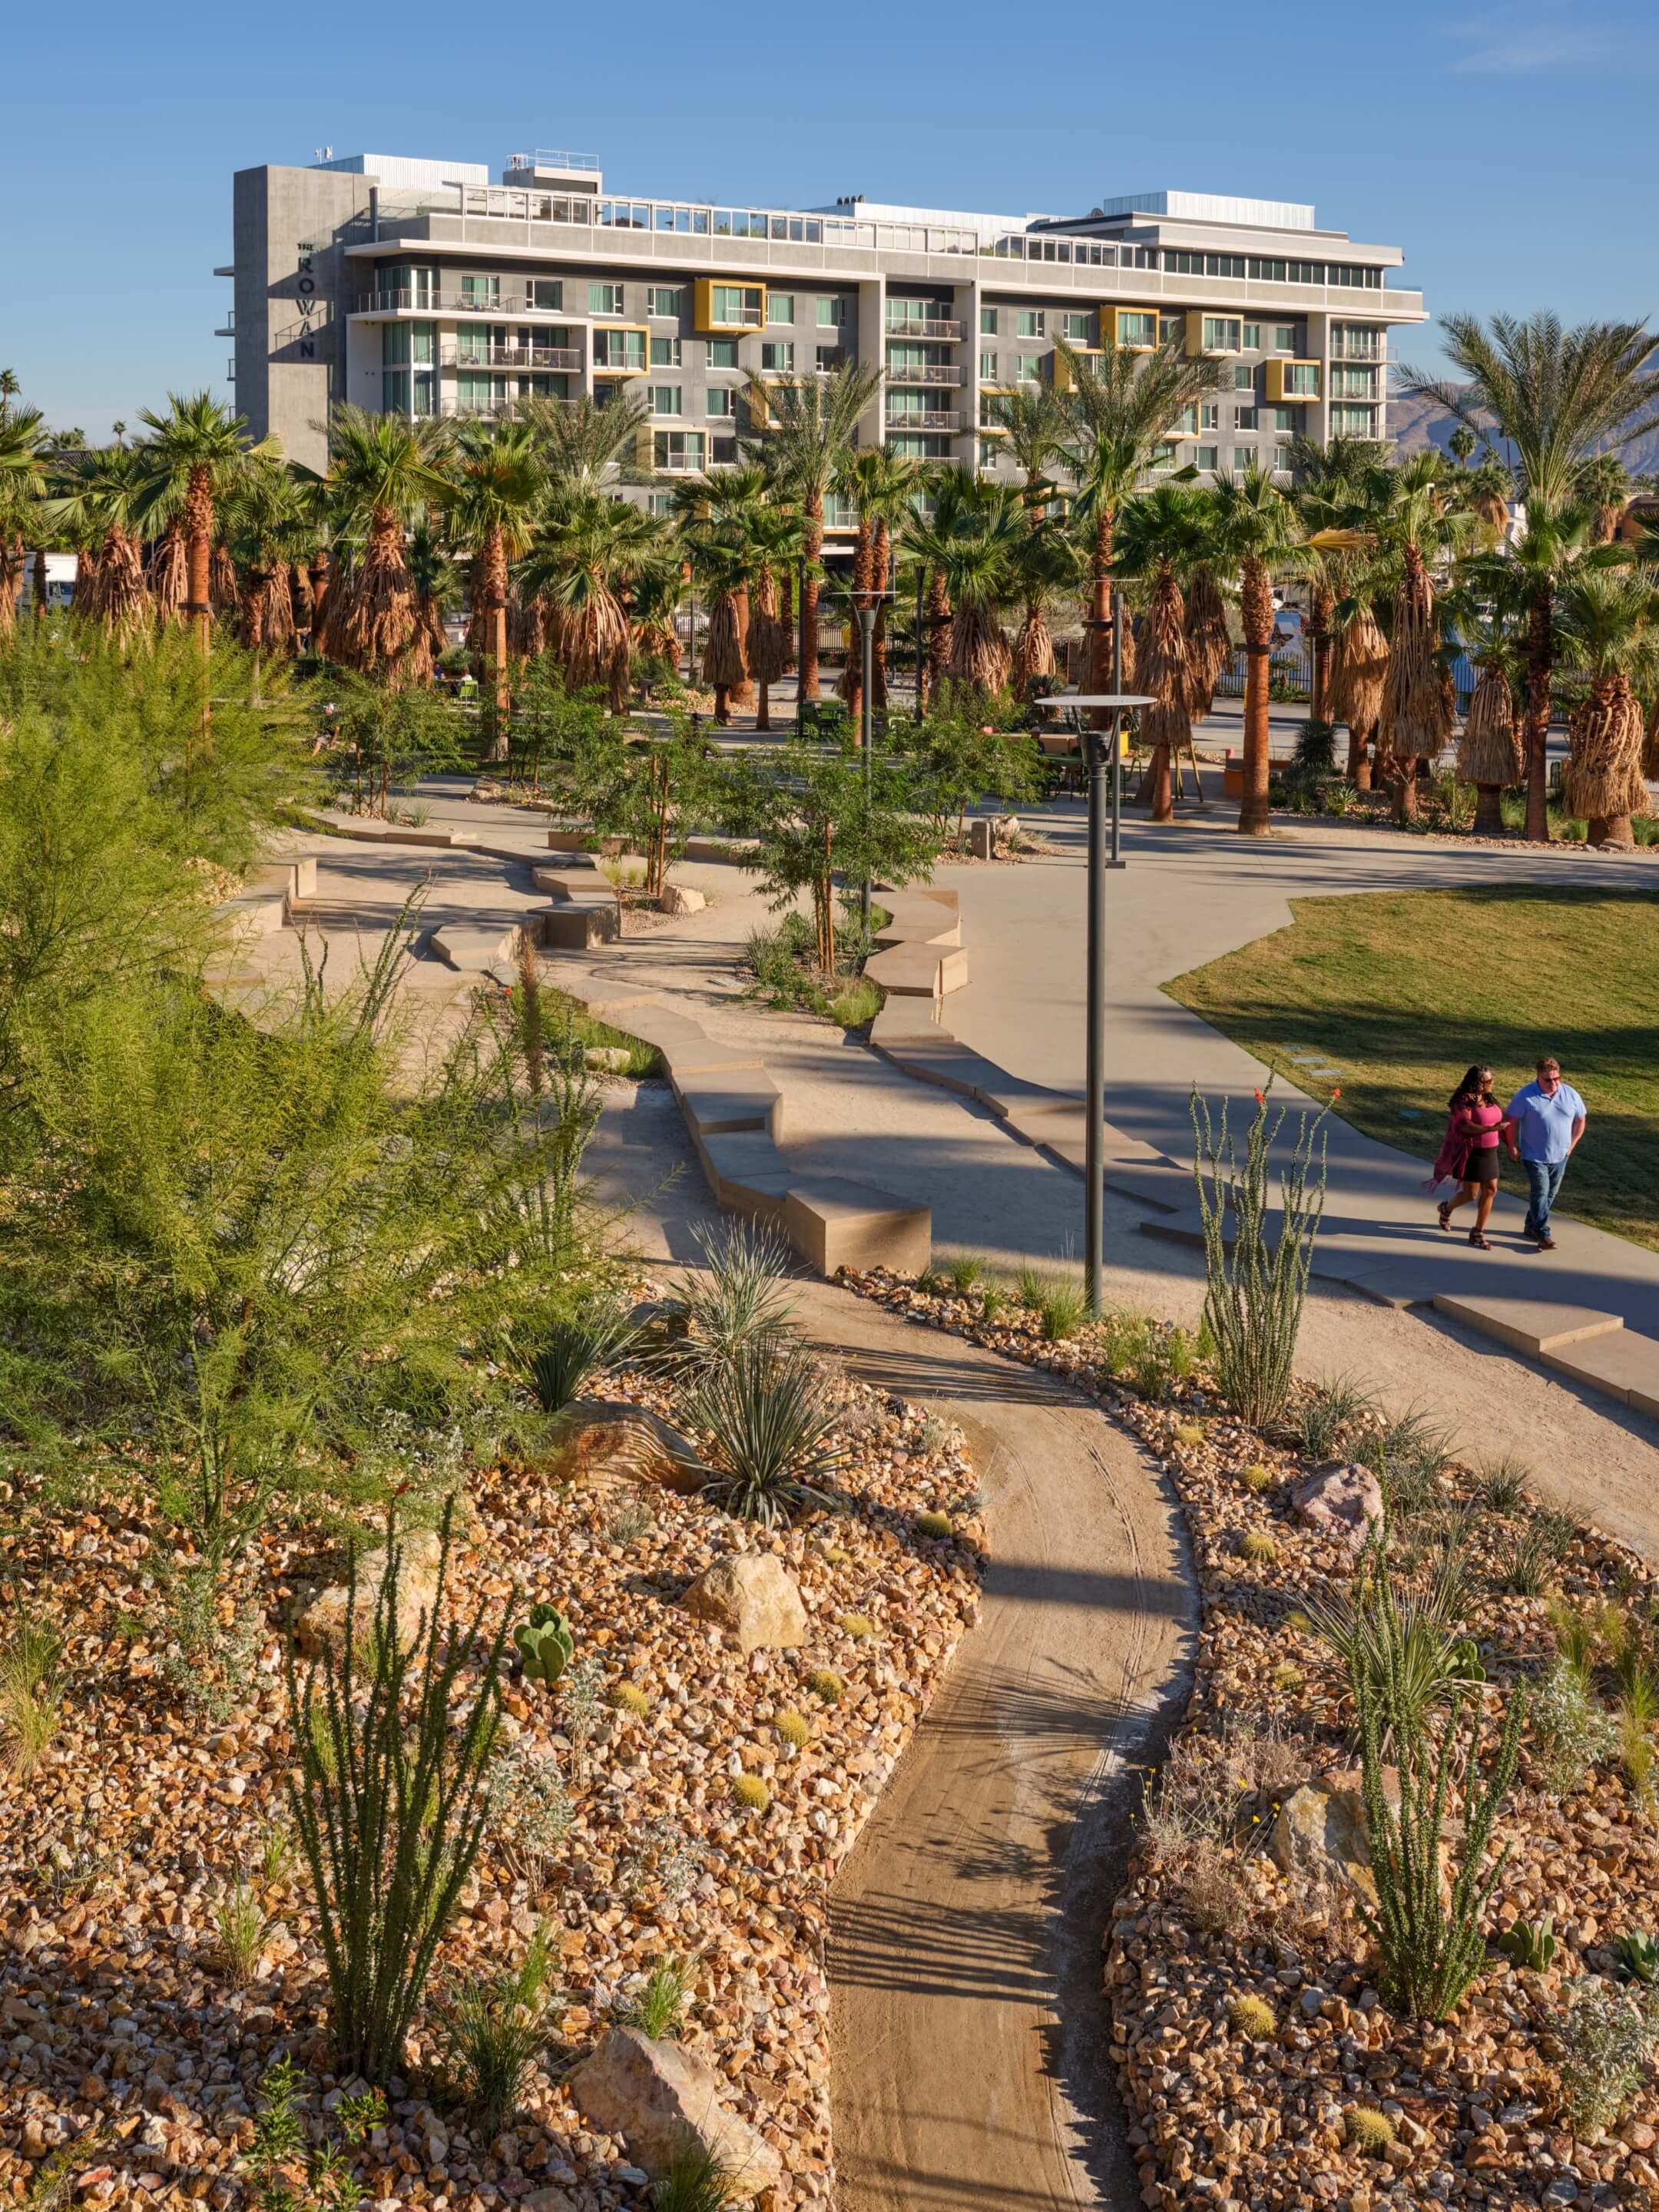 people walk along a path in a desert park with palm trees in the background